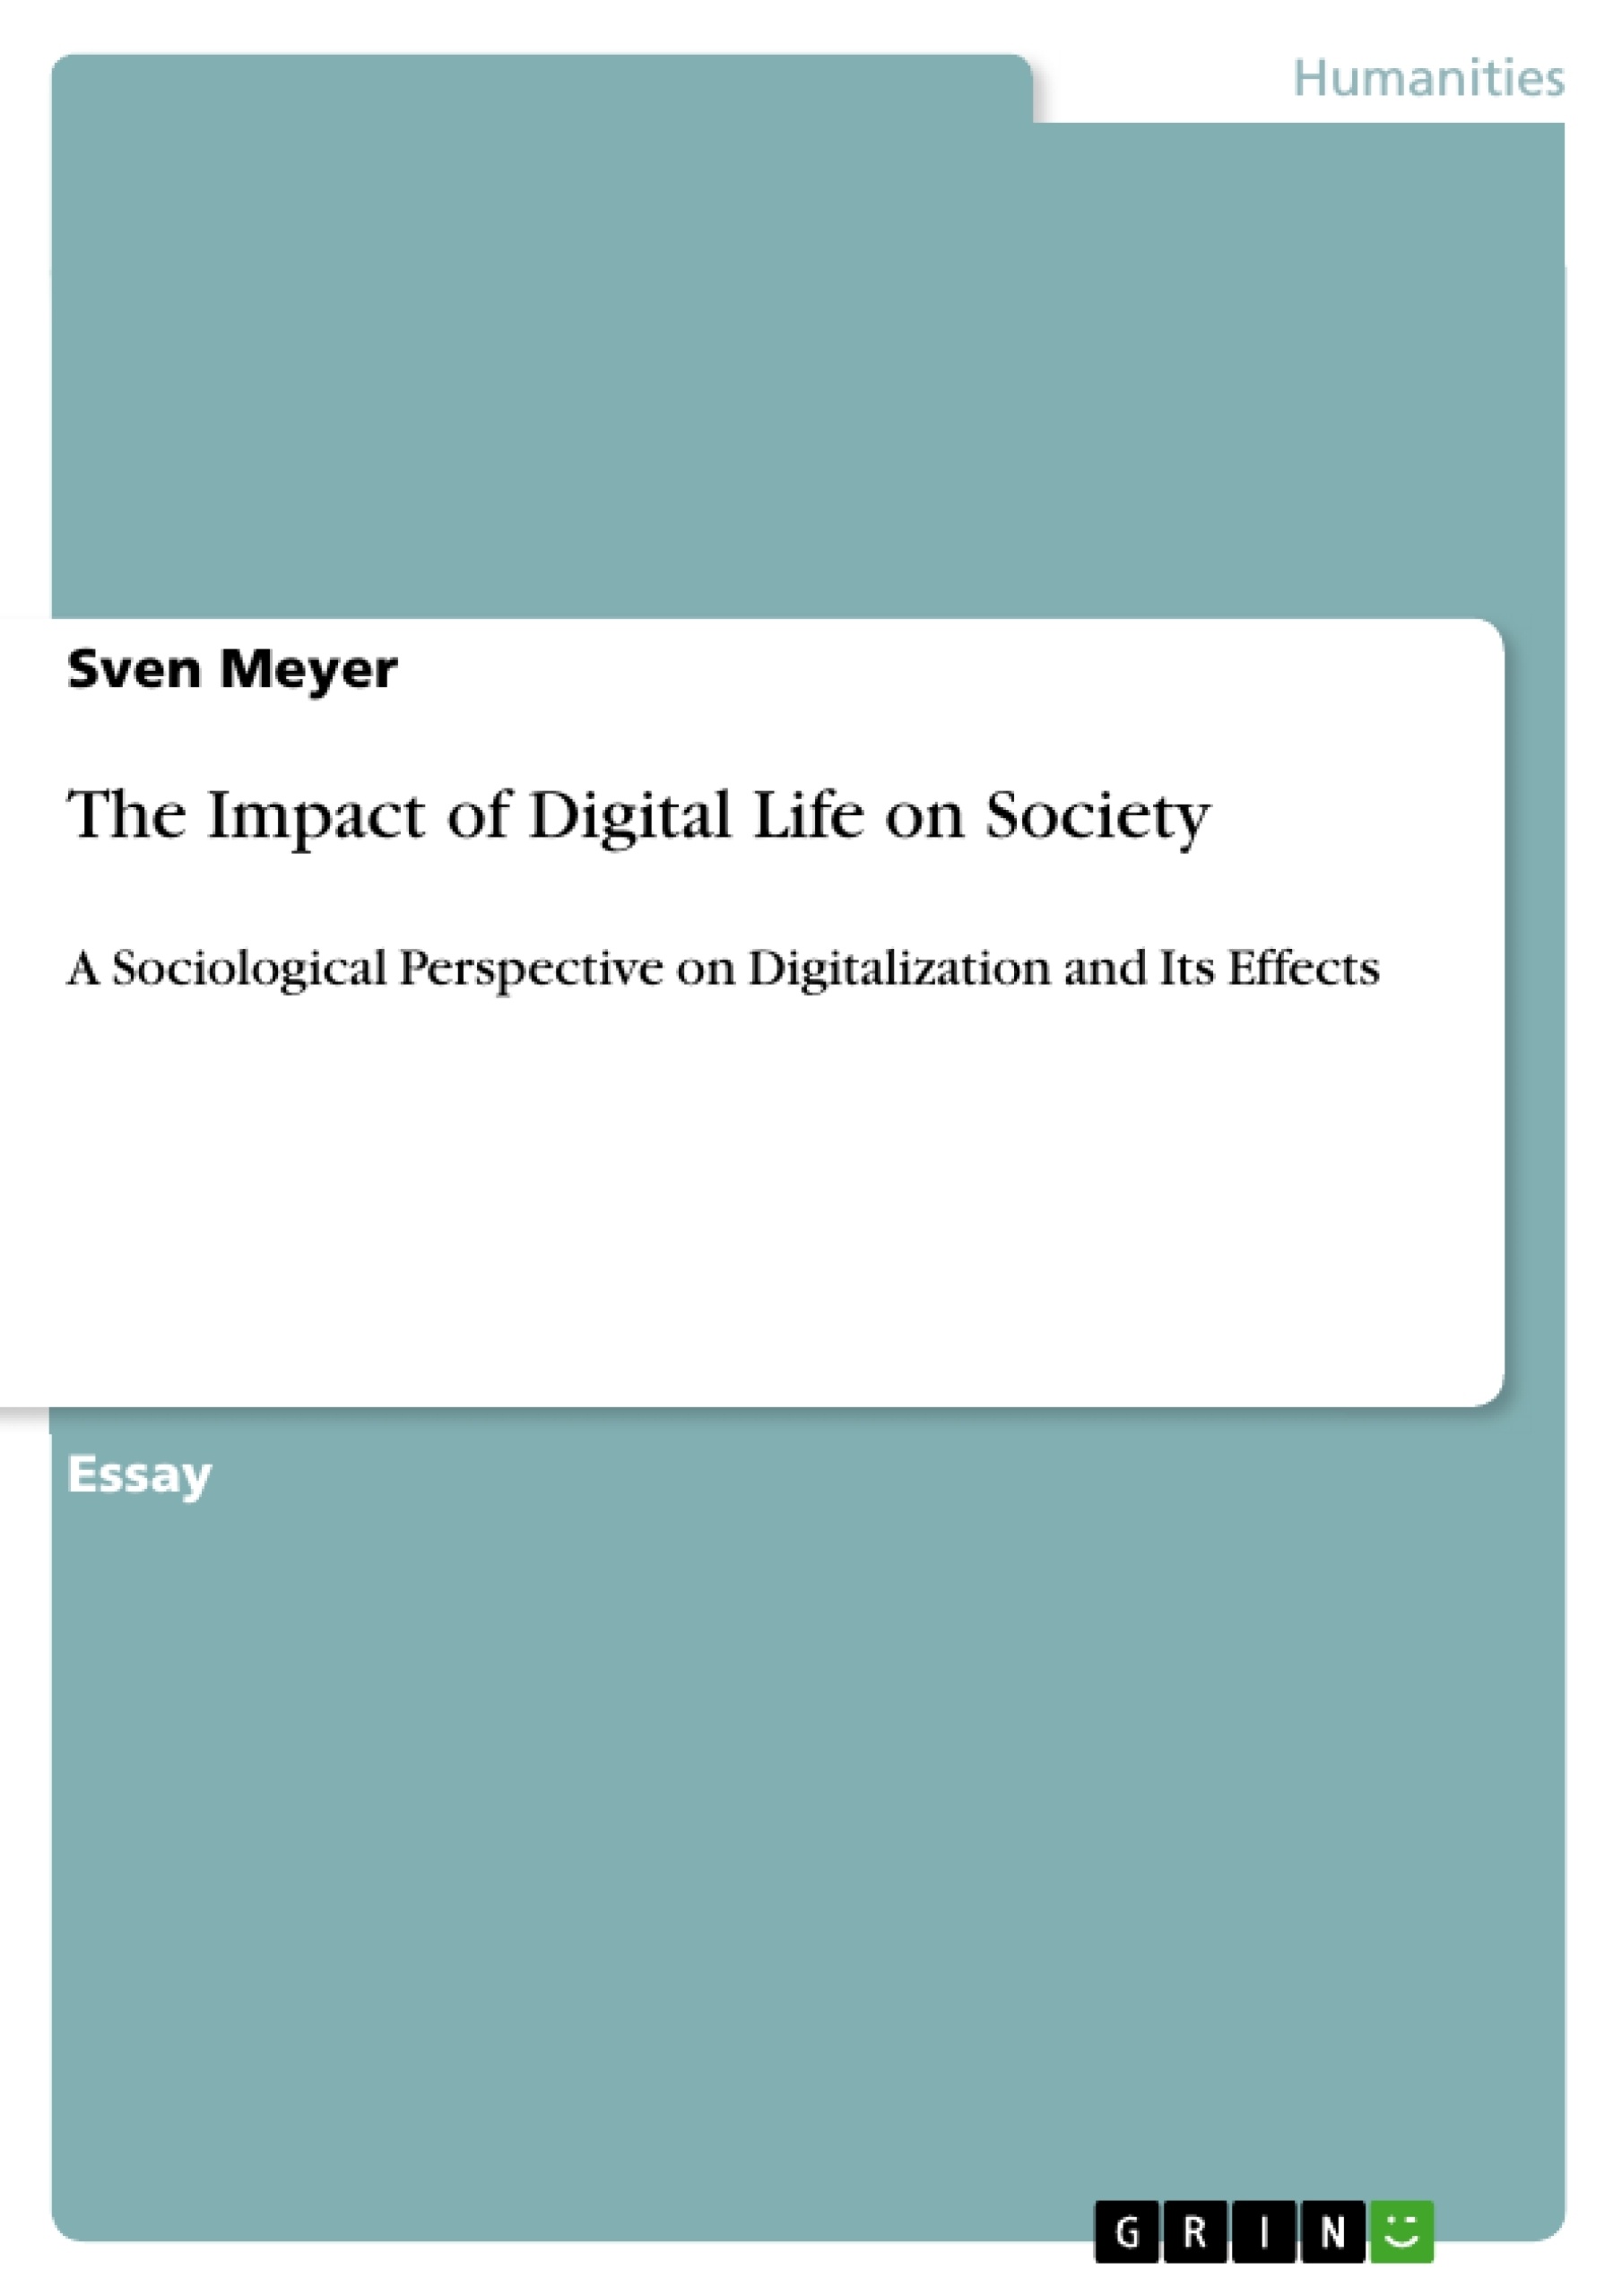 Título: The Impact of Digital Life on Society